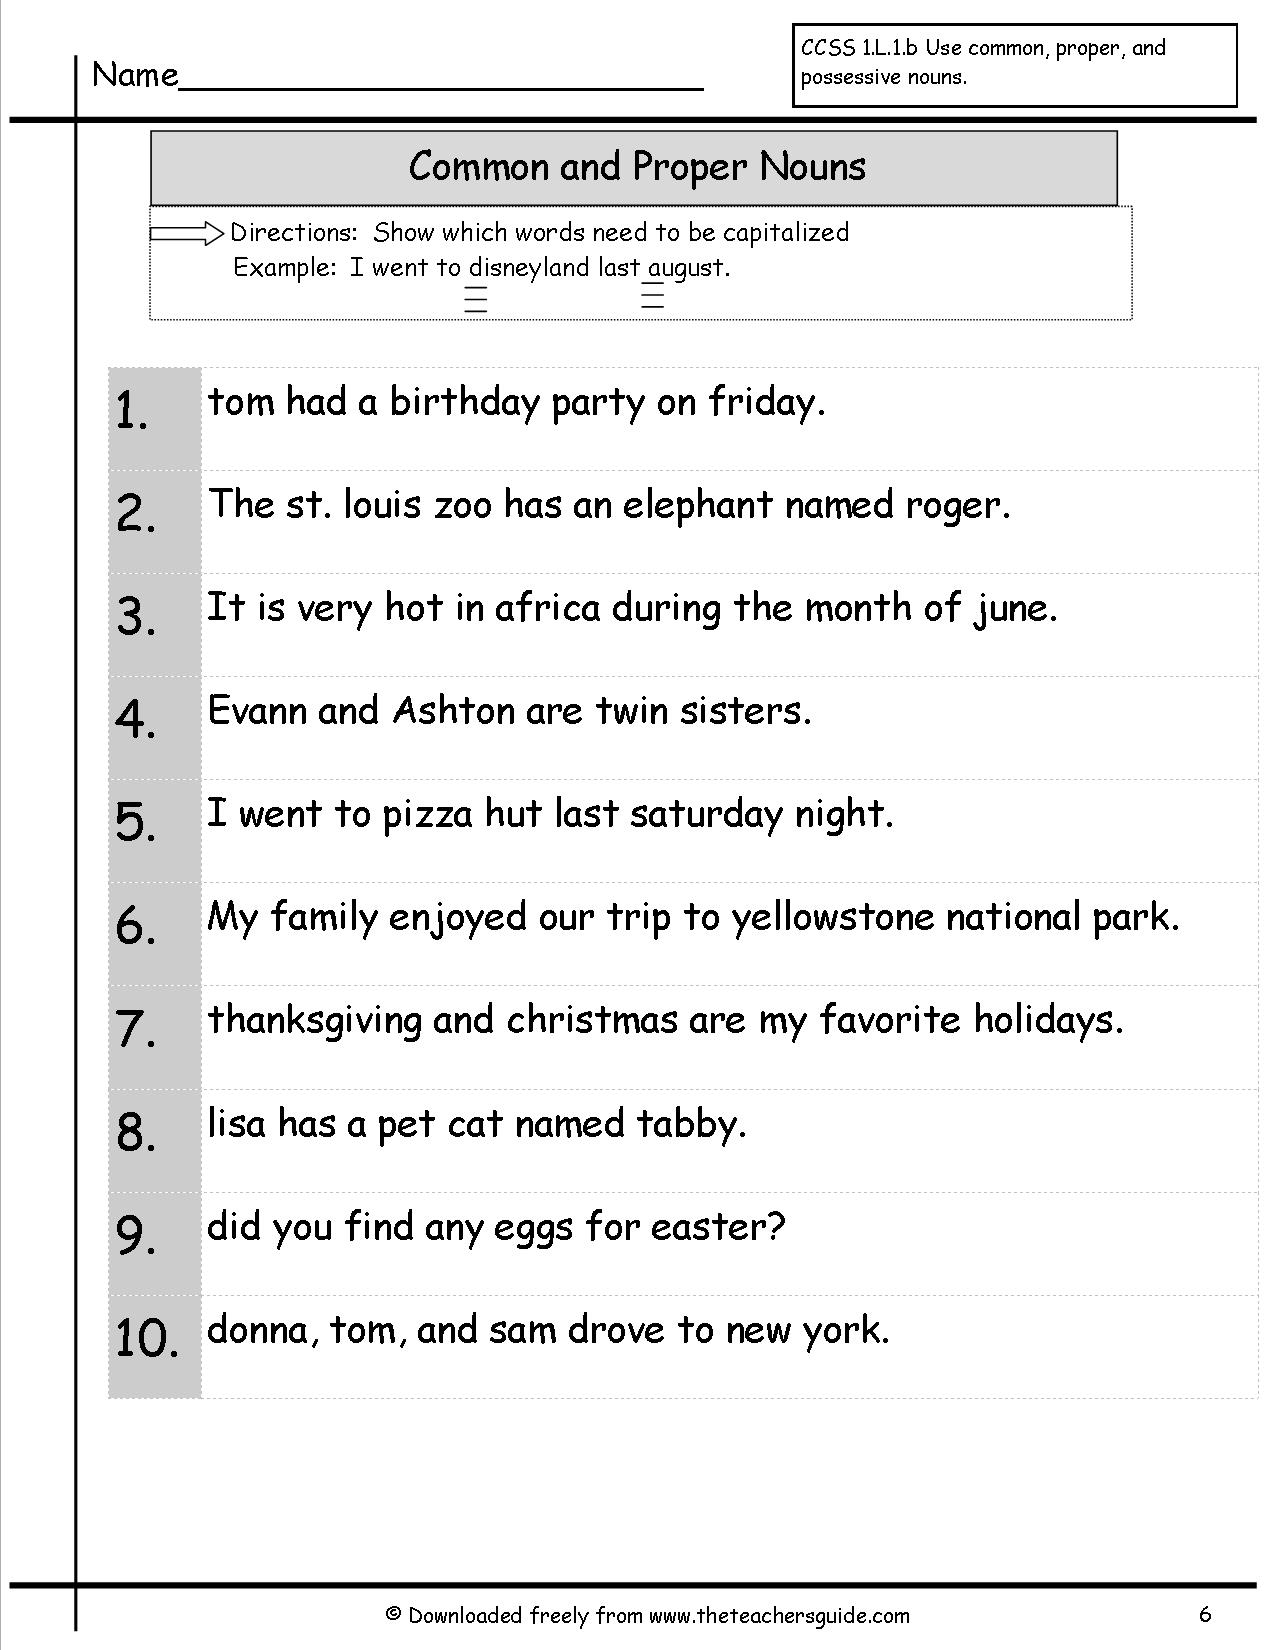 common-and-proper-noun-worksheets-made-by-teachers